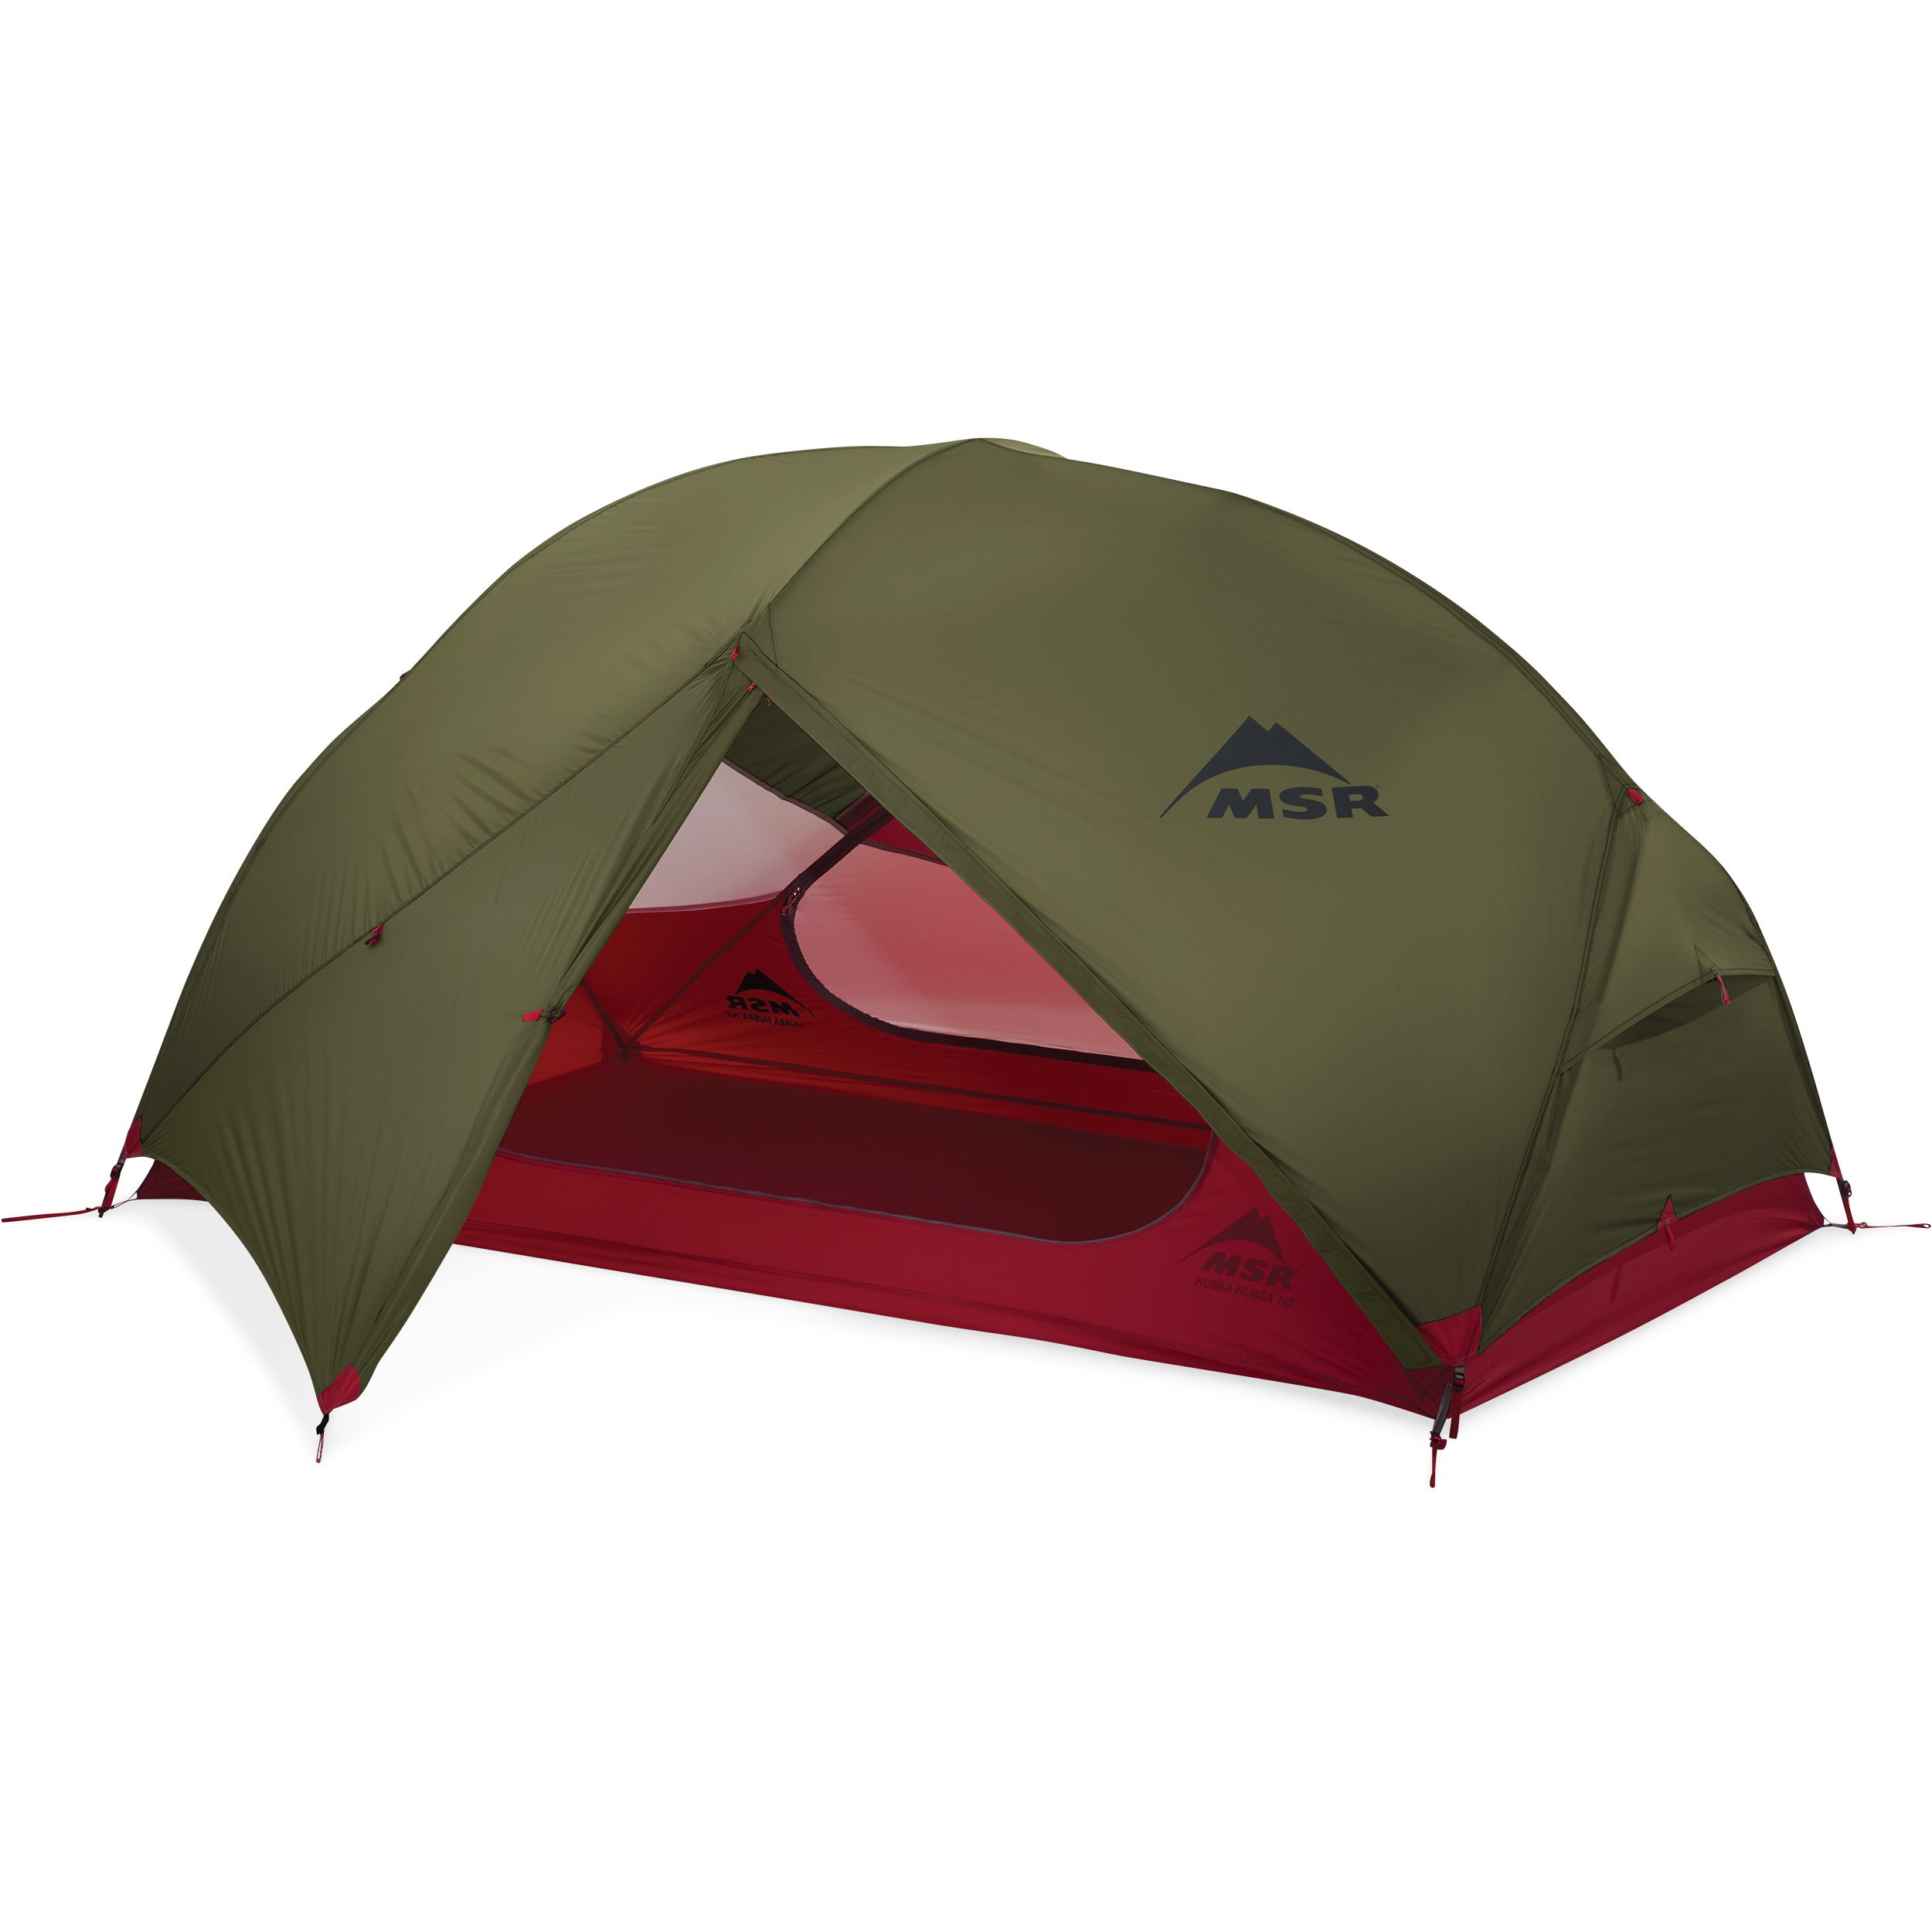 Hubba Hubba™ NX 2-Person Backpacking Tent - MSR